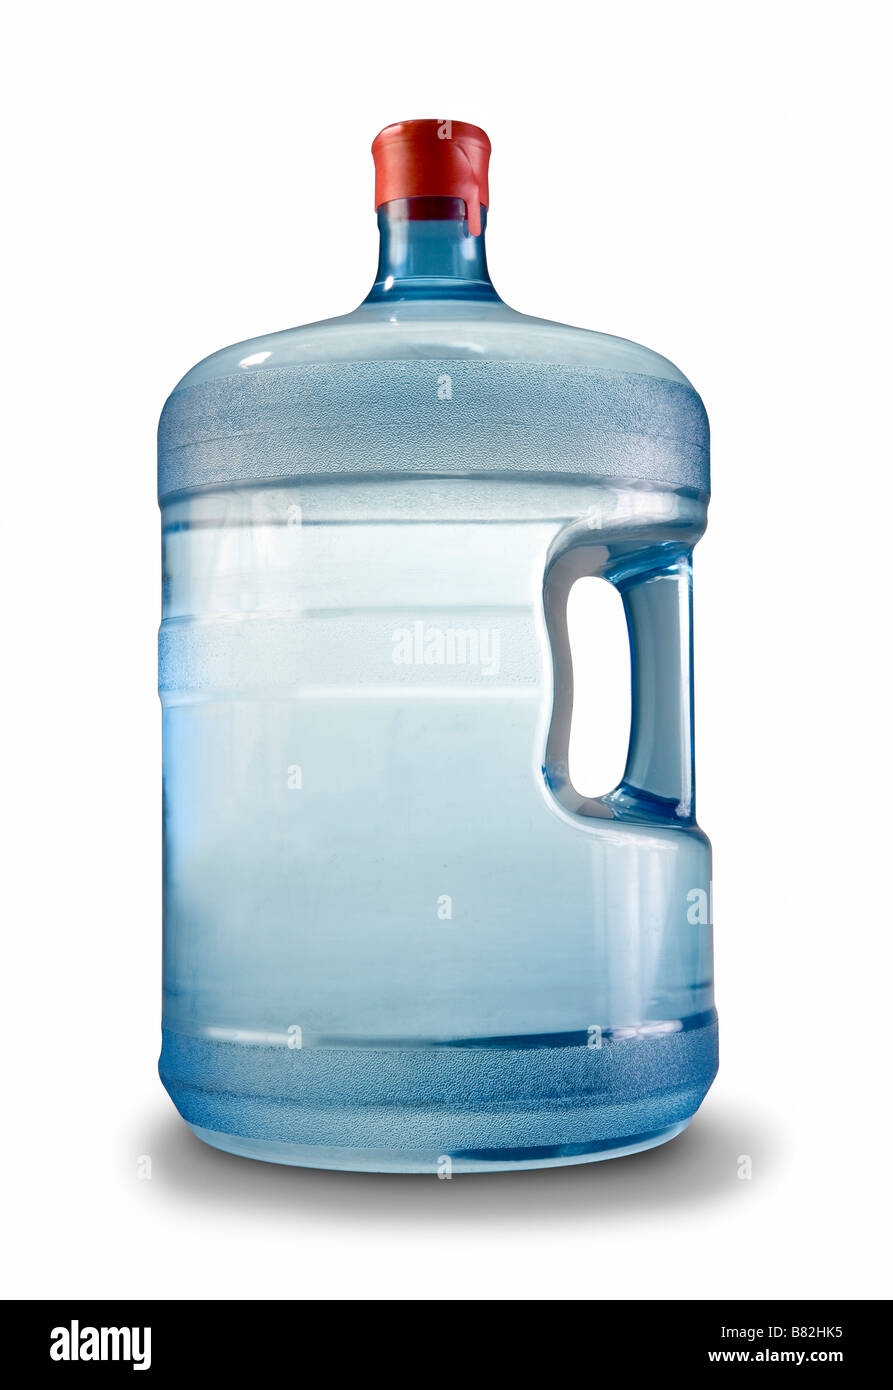 A 5 gallon water jug of Spring or purified water from a commercial business Stock Photo